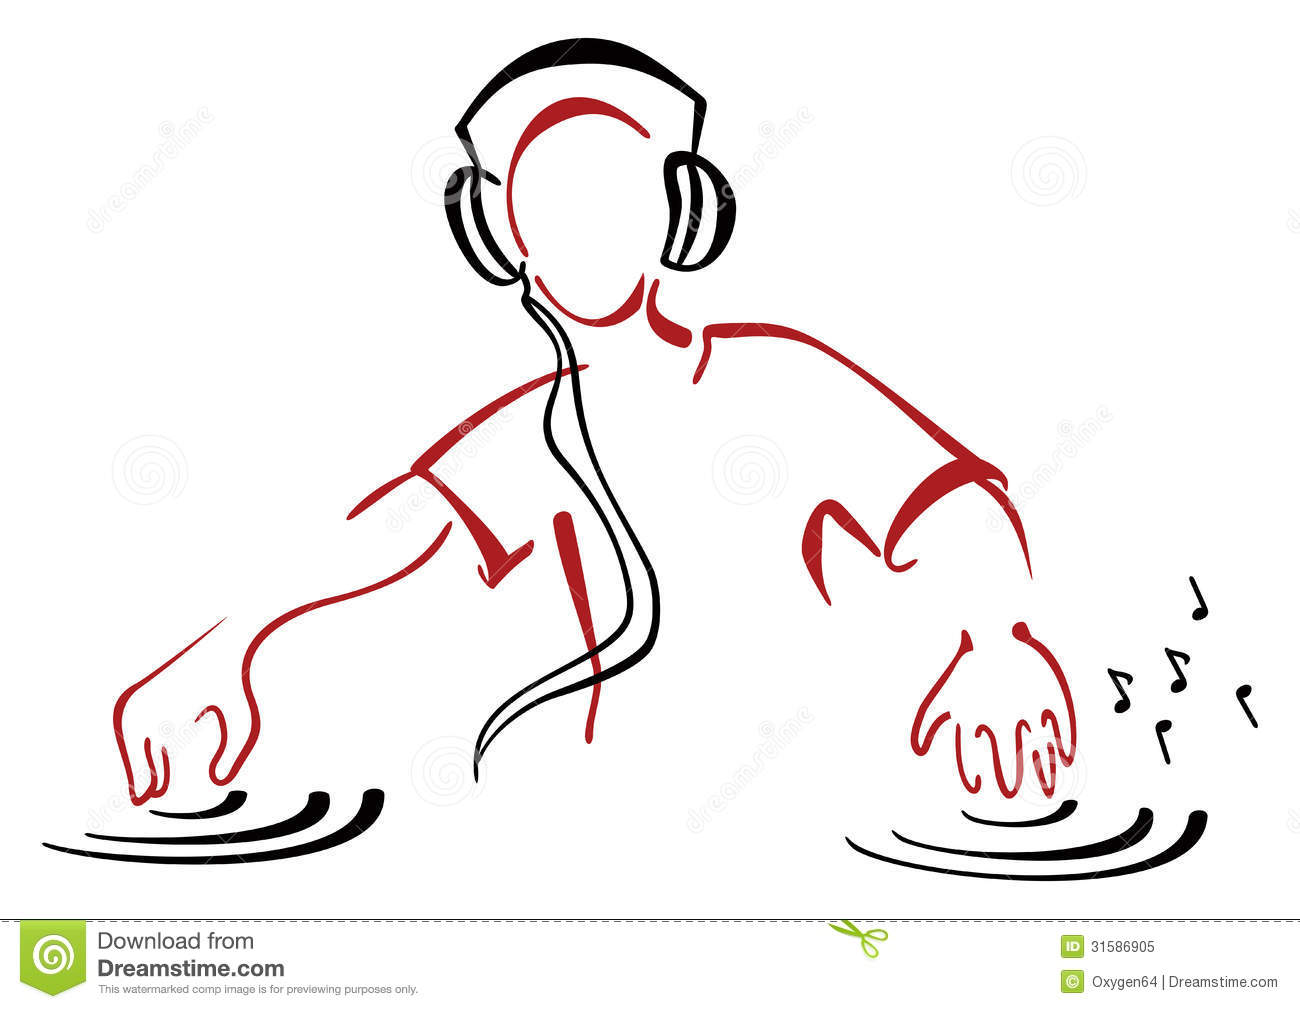 Dj Behind Console Royalty Free Stock Photo   Image  31586905